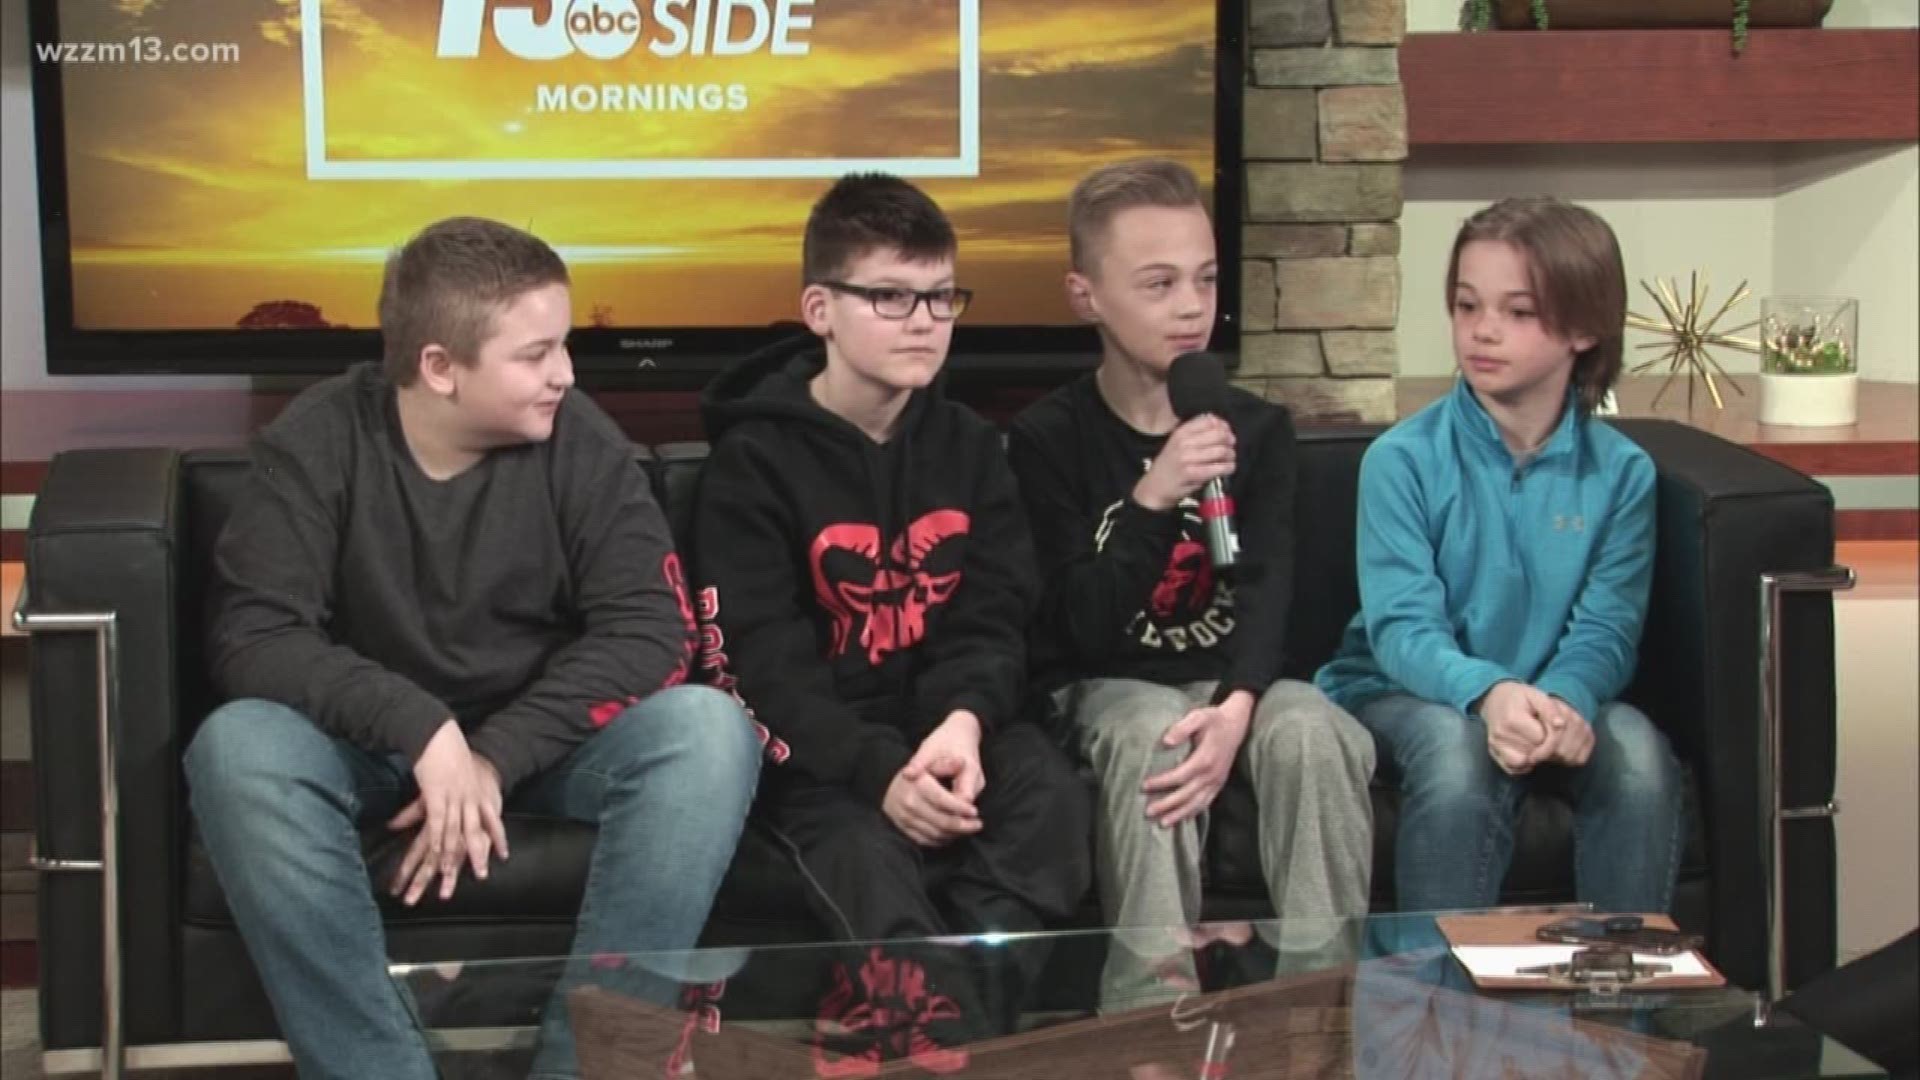 Meet the students from Valley View Elementary participating in this week's "Getting Schooled".